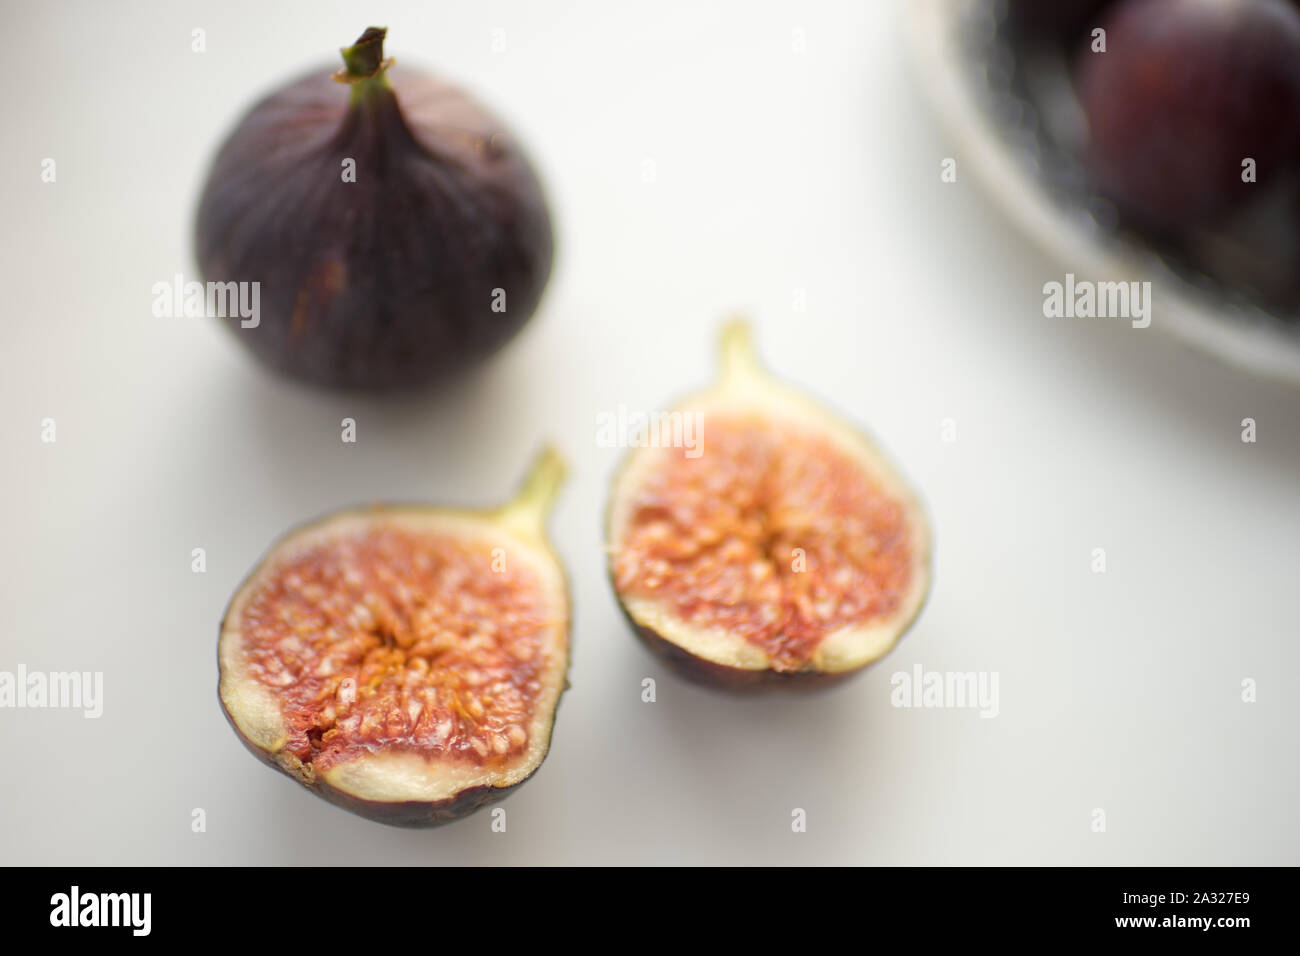 One whole fig and the second cut in half on a white table Stock Photo